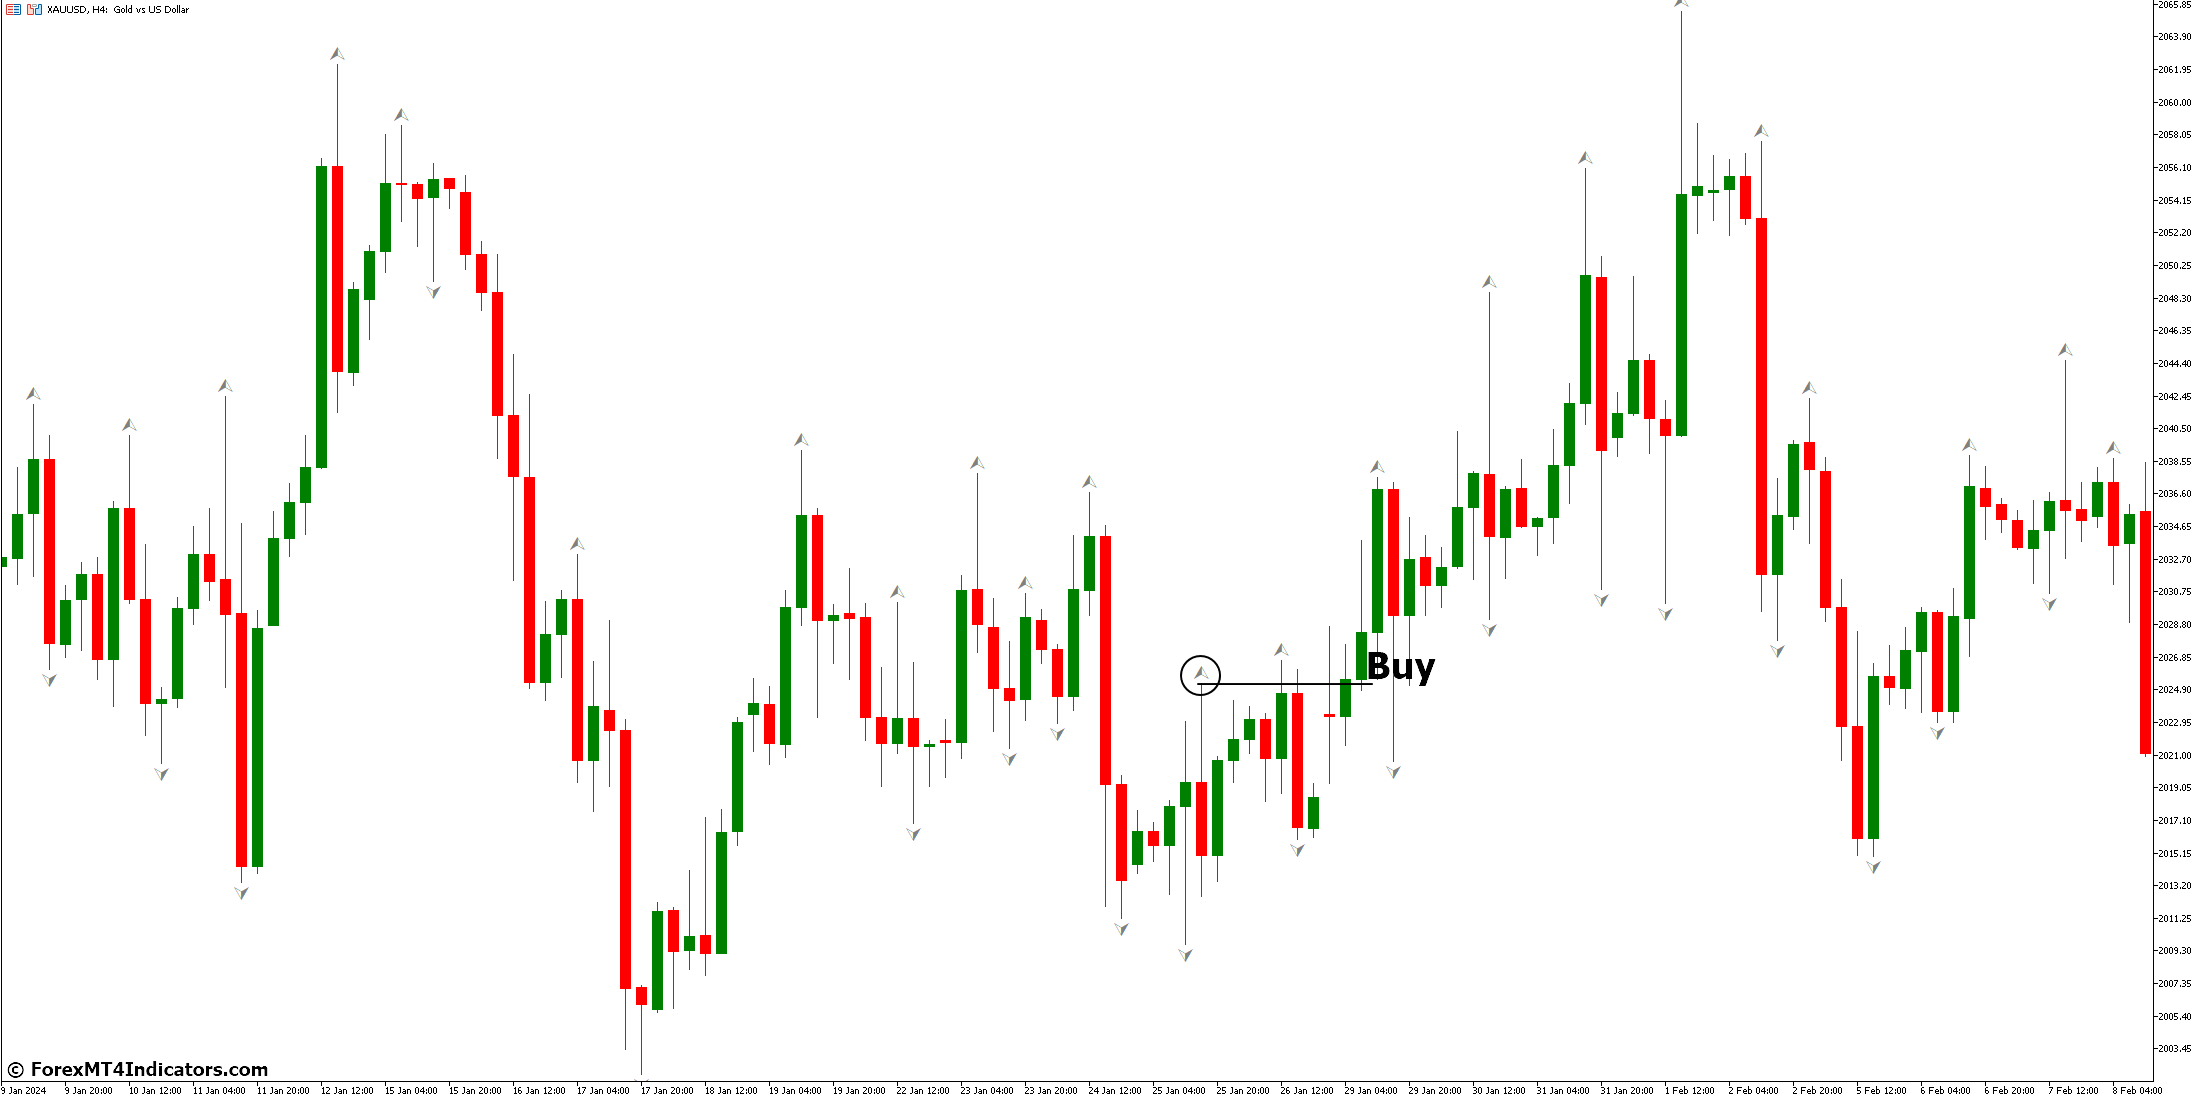 How to Trade with Fractals Indicator - Buy Entry